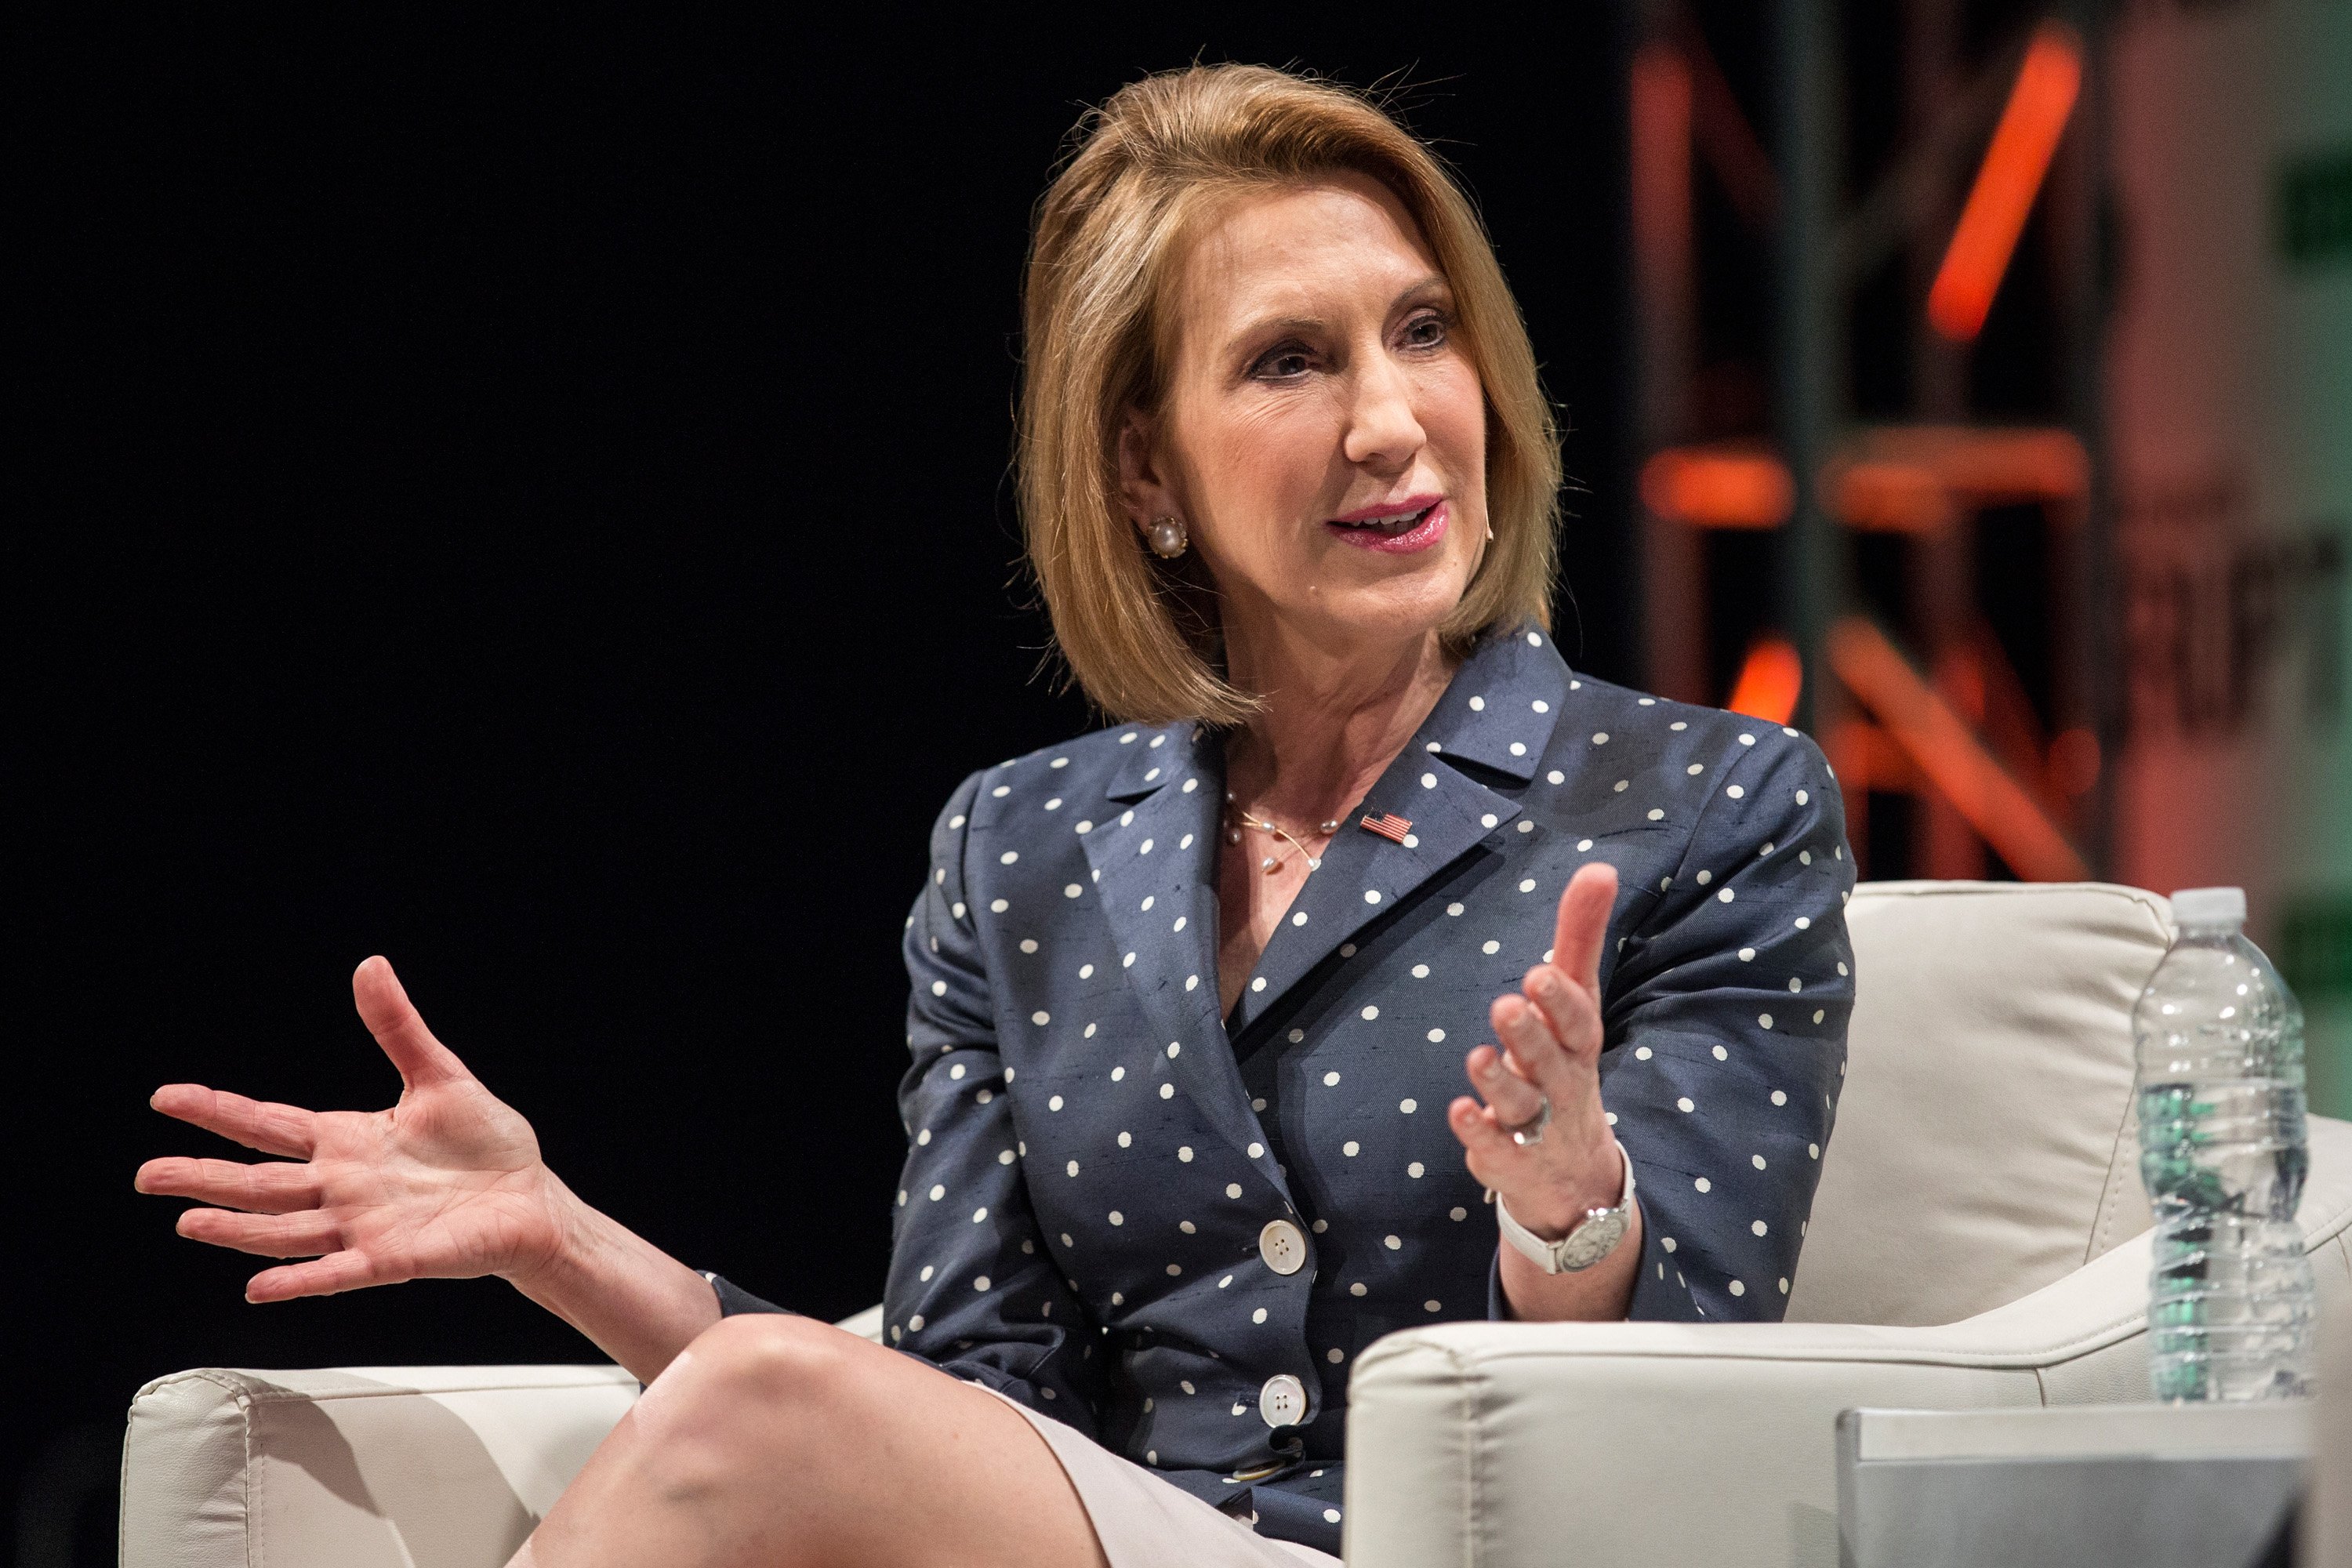 Republican presidential hopeful Carly Fiorina speaks at TechCrunchÕs Disrupt conference on May 5, 2015 in New York City. (Andrew Burton—Getty Images)